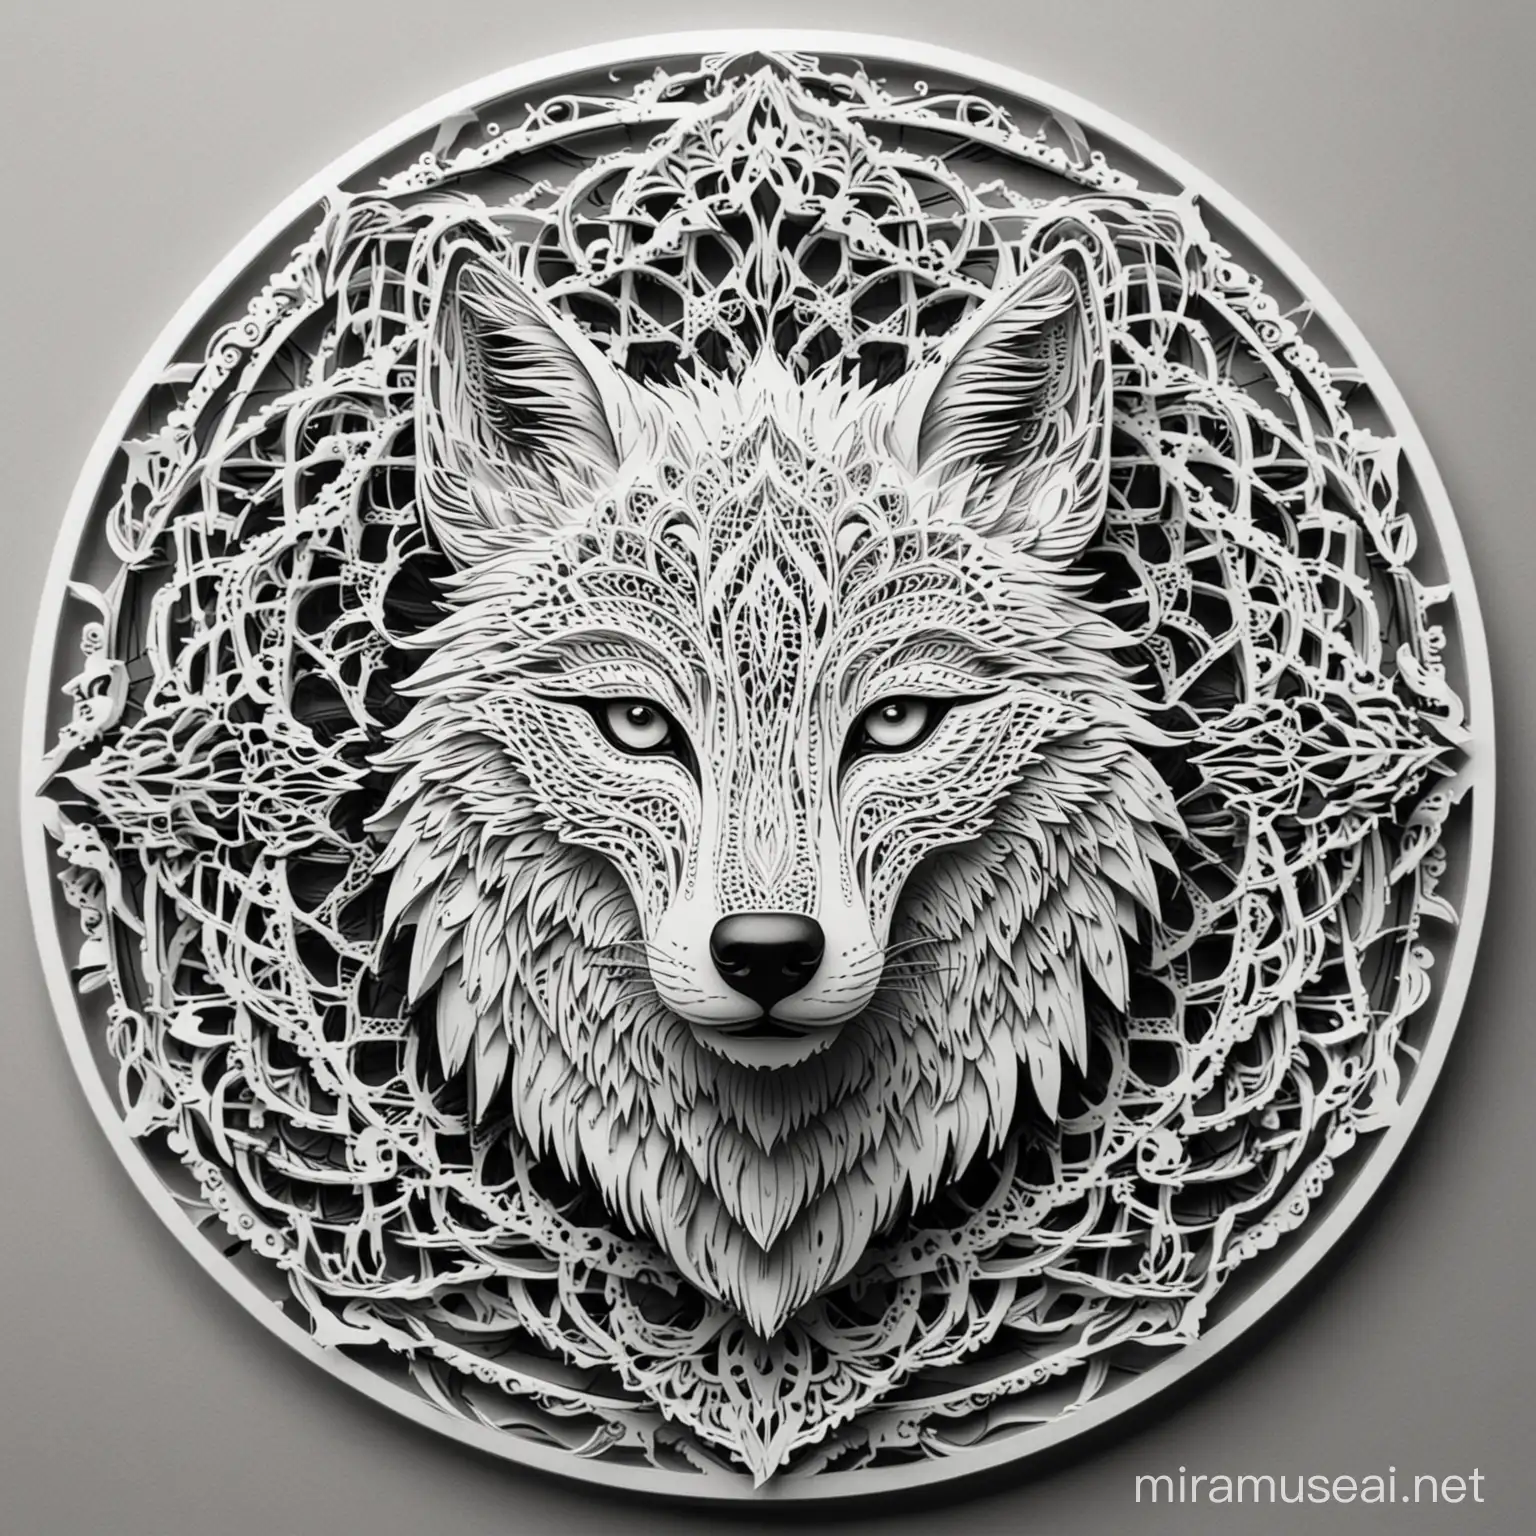 multilayer design for laser cut, mandala, wolf, perfectly symetrical black and white without shadow


